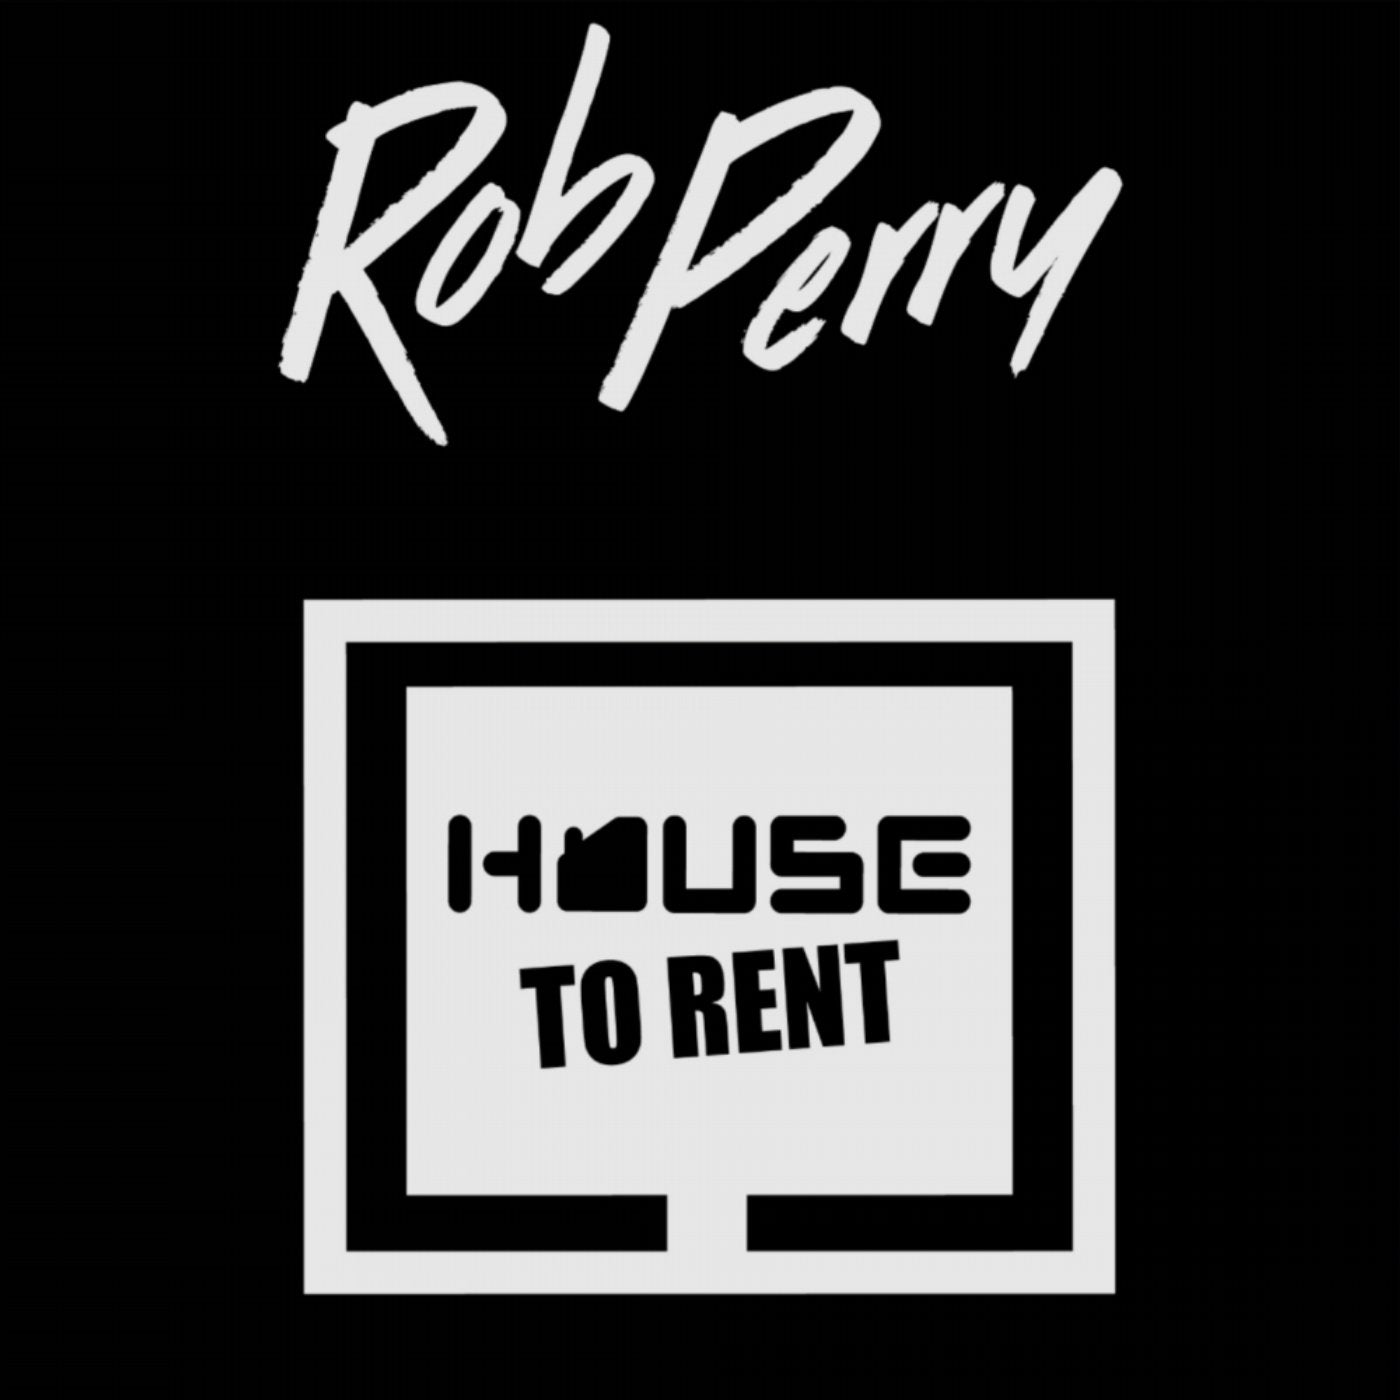 House To Rent, Vol. 1